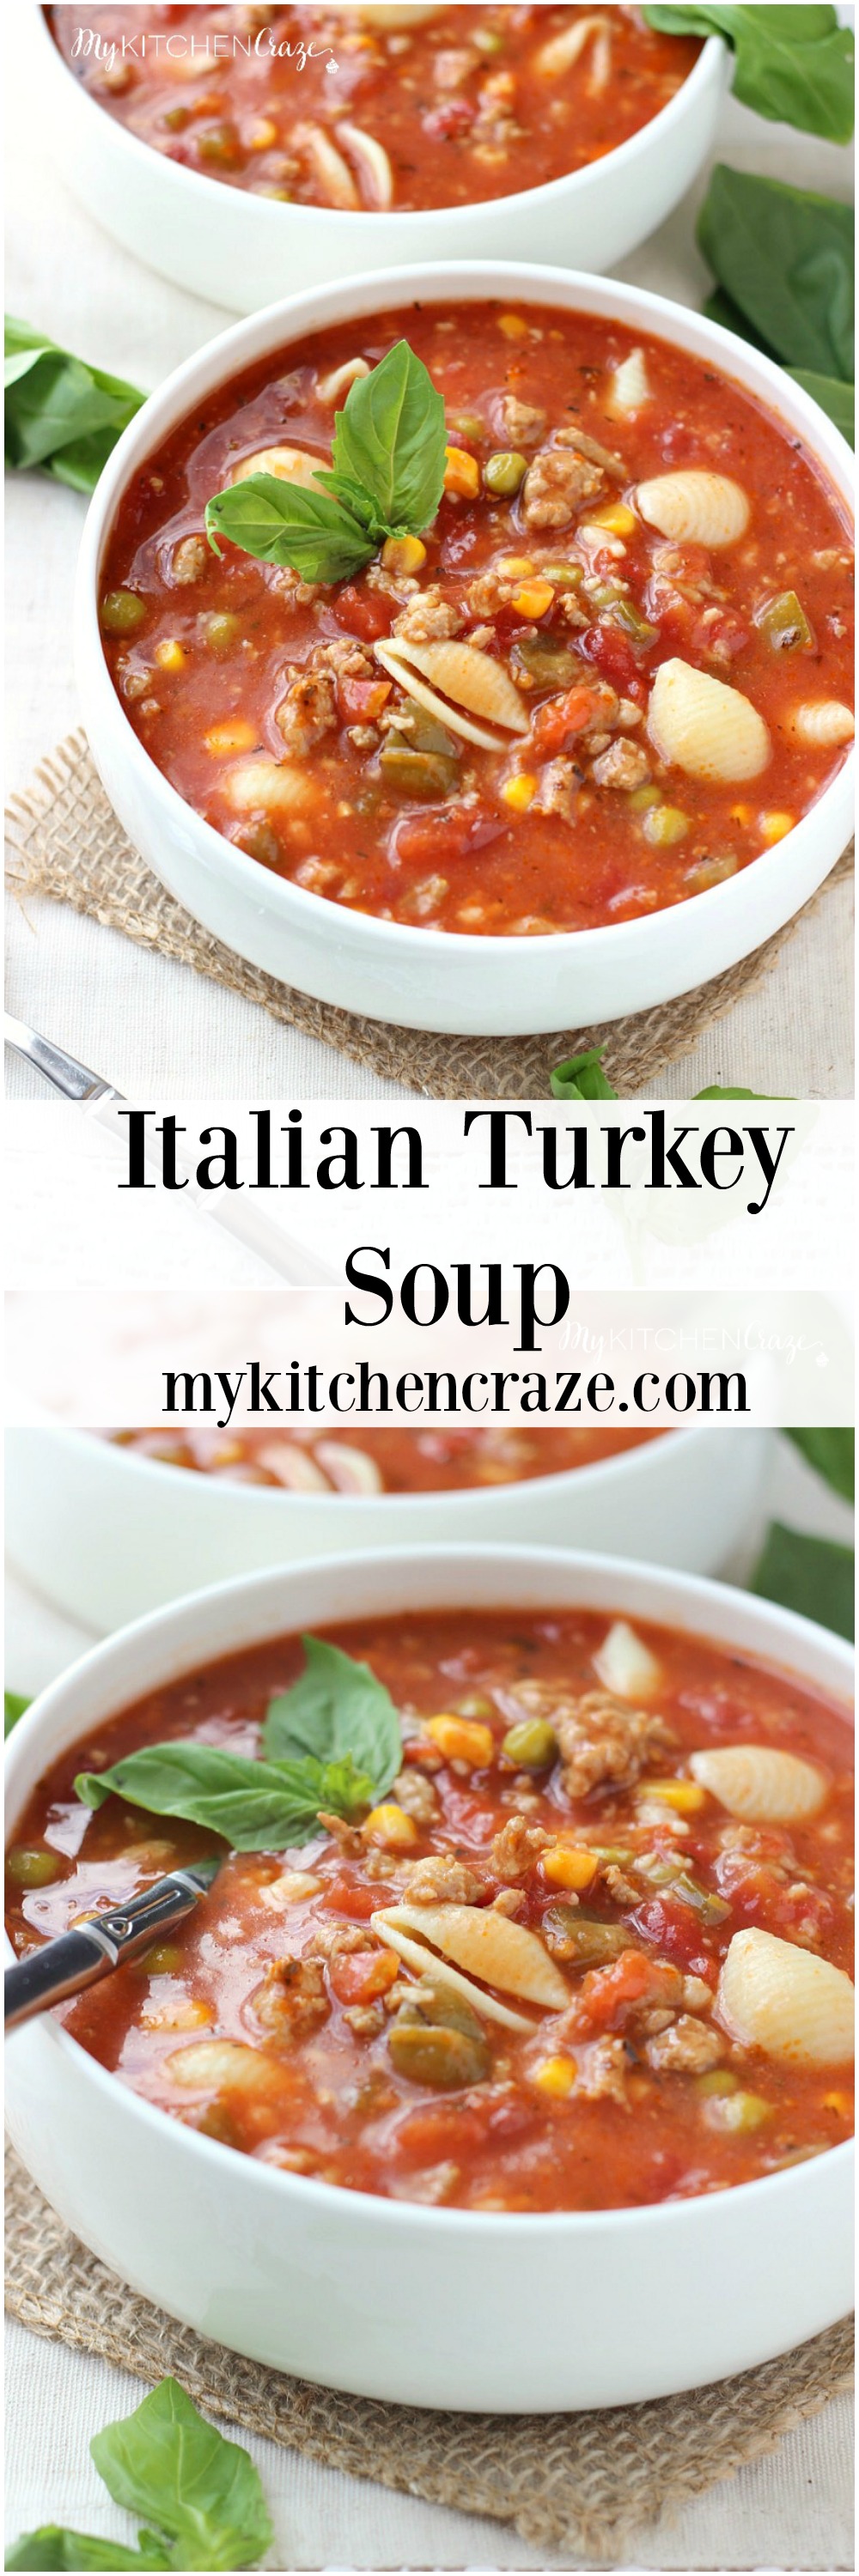 Italian Turkey Soup ~ mykitchencraze.com ~ A hearty and flavorful soup for those chilly nights. Loaded with noodles, cheese, vegetables and turkey. Yum!